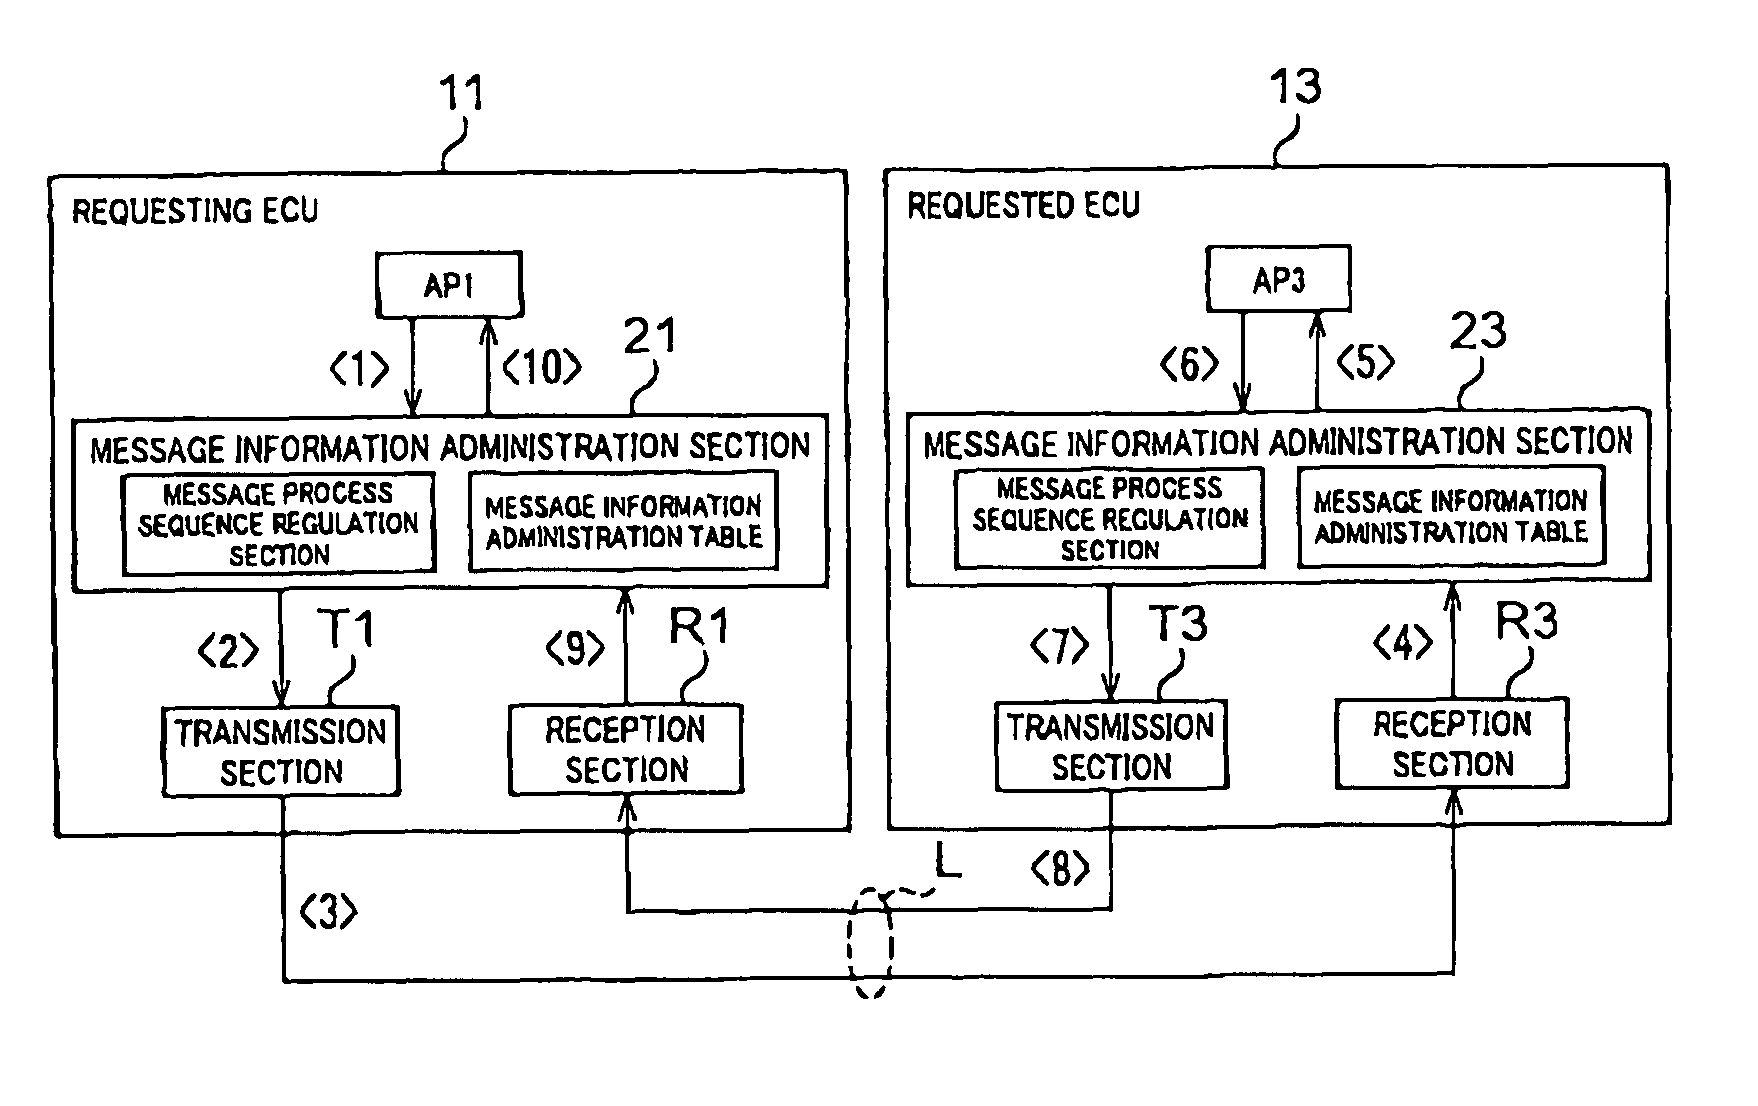 Apparatus for administrating communication among on-vehicle electronic control units